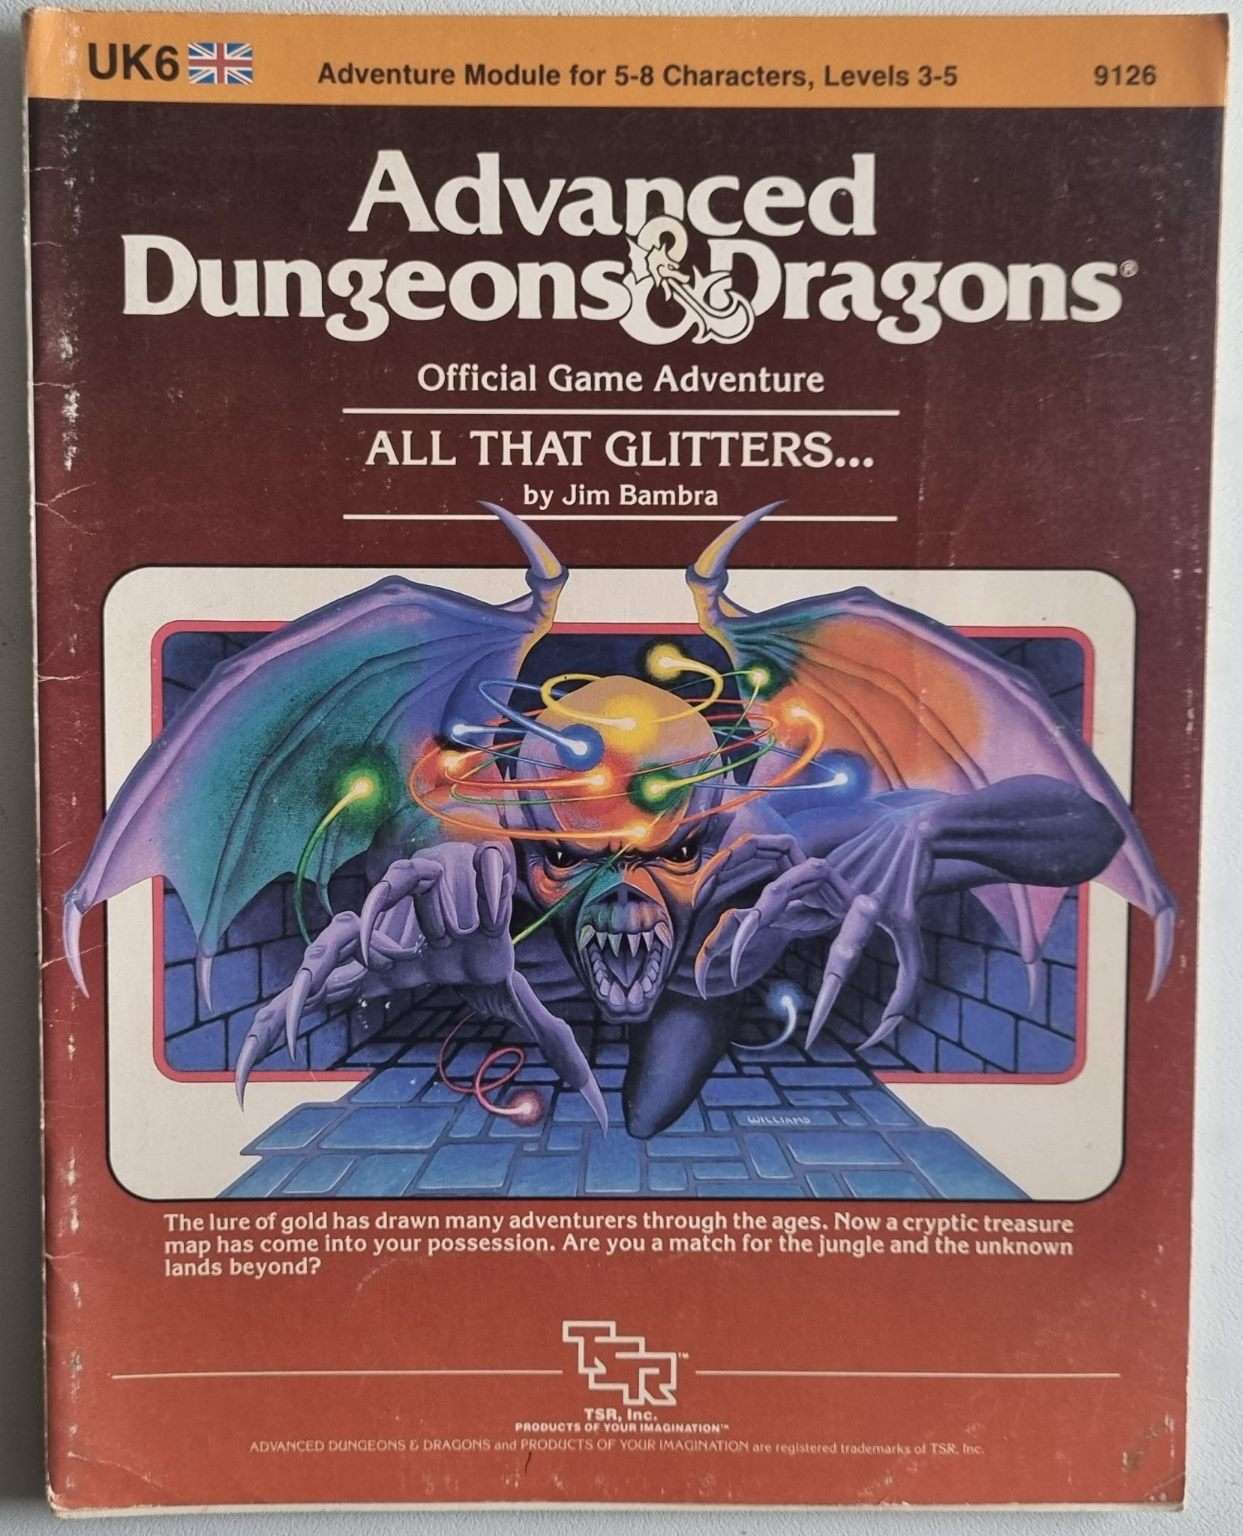 Advanced Dungeons and Dragons - All That Glitters... (UK6 9126) Default Title